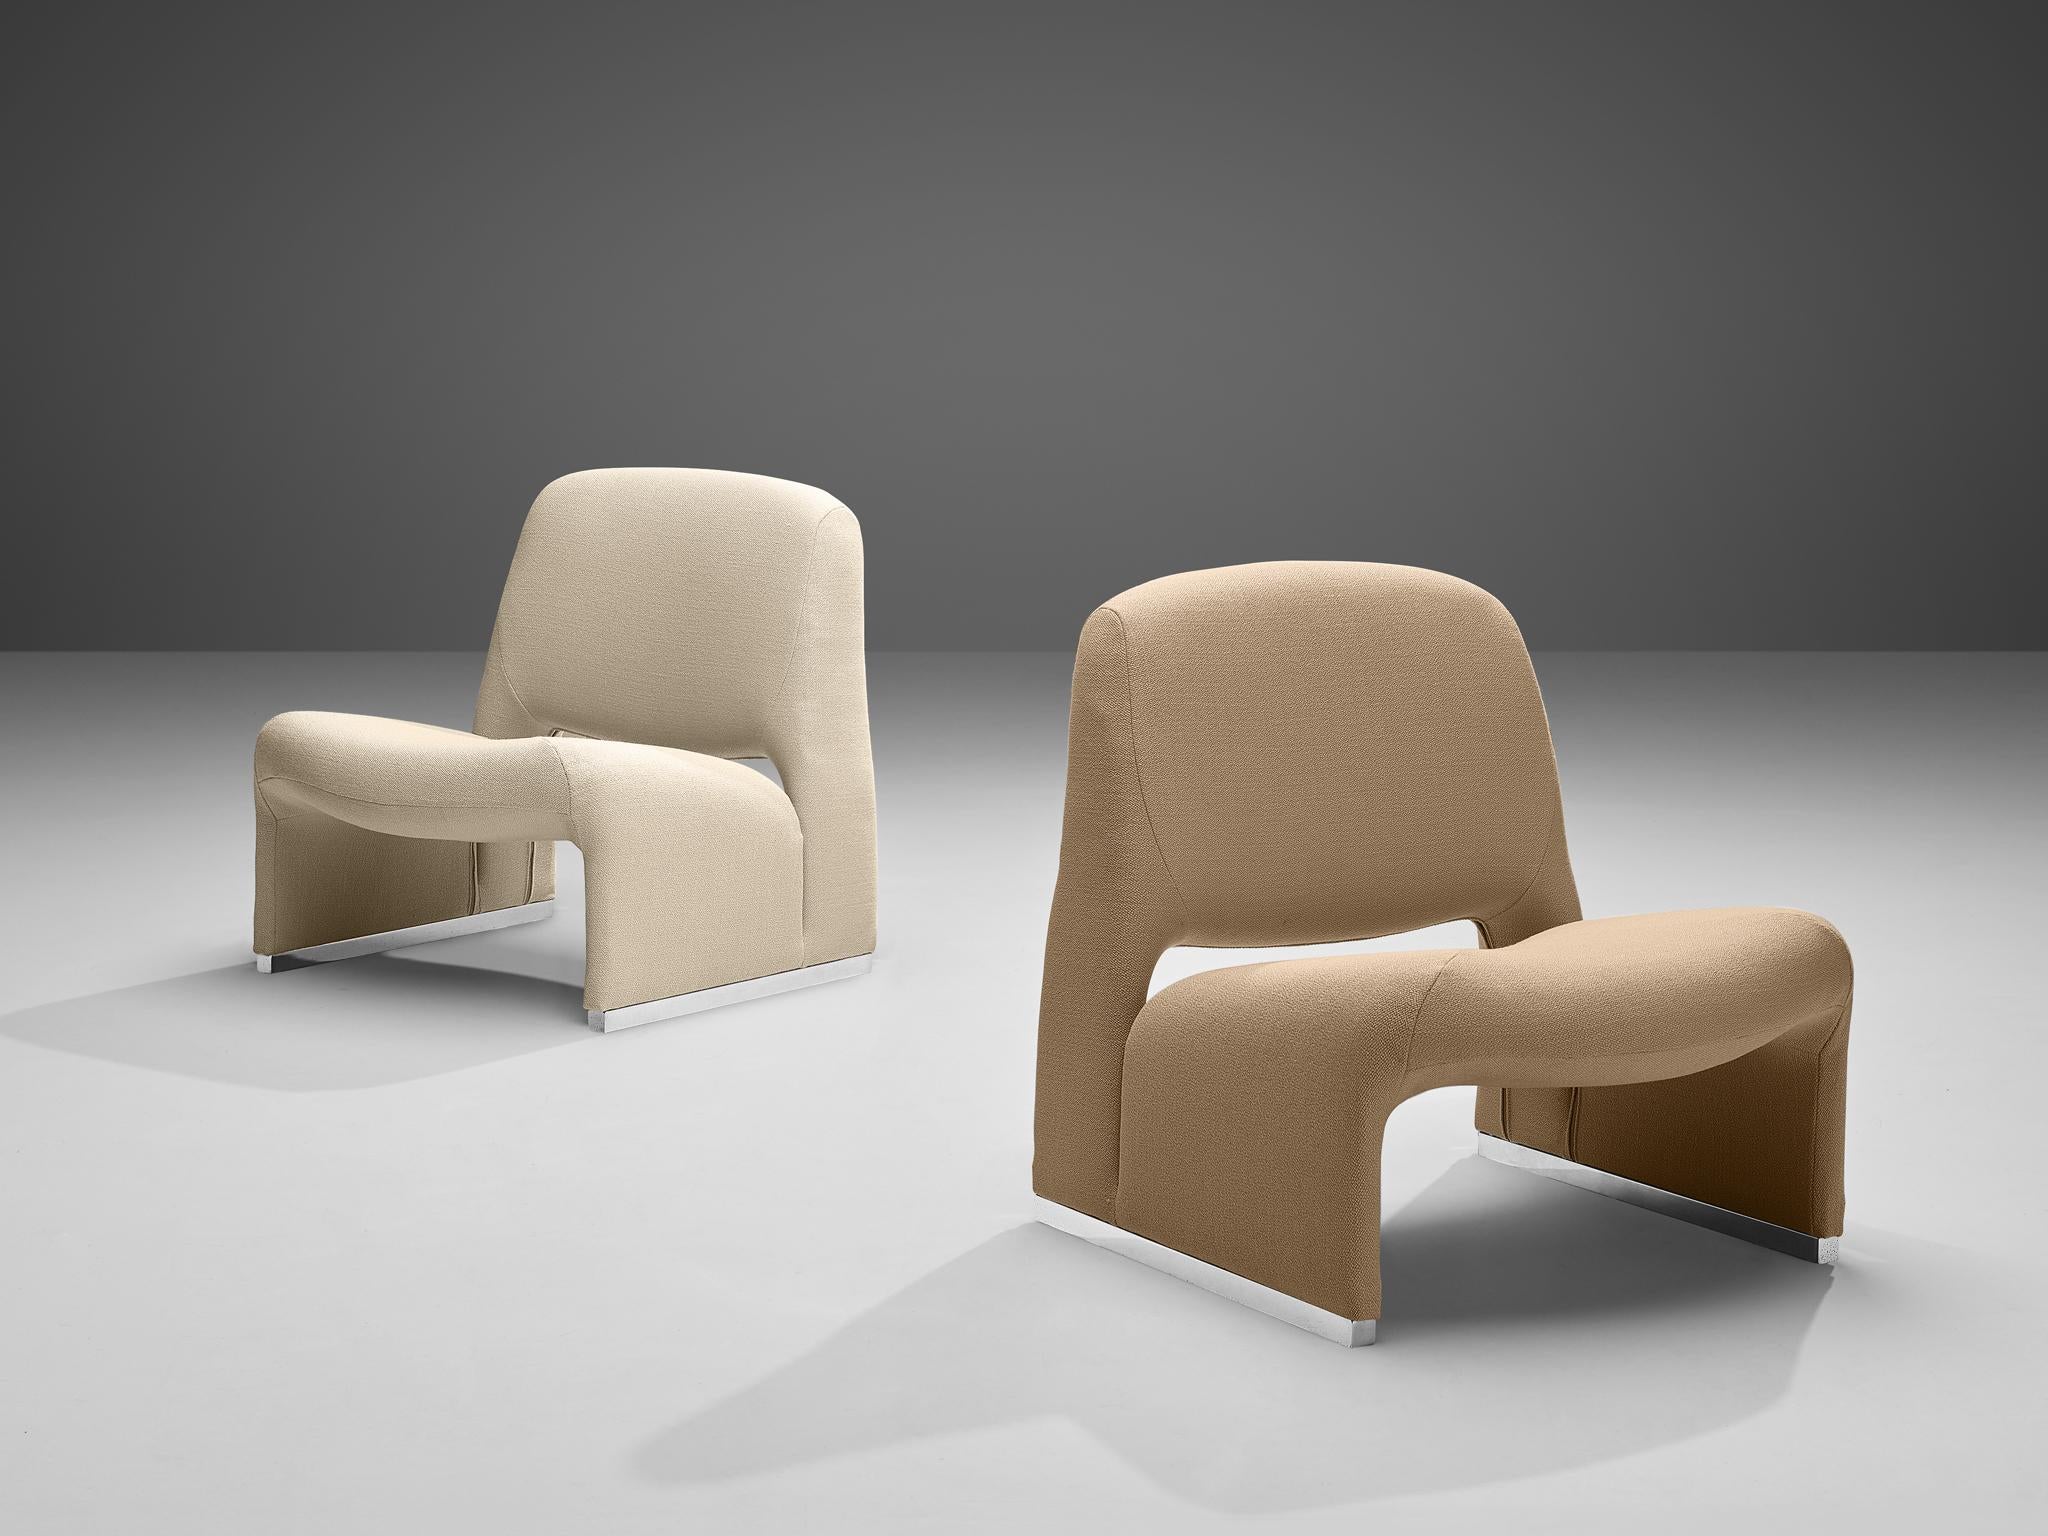 Lounge chairs, fabric, aluminum, Italy, 1970s

These lounge chairs strongly remind of Giancarlo Piretti’s ‘Alky’ lounge chair (1969), yet they feature characteristic differences. Whereas the ‘Alky’ lounge chair consists of one shell, these chairs